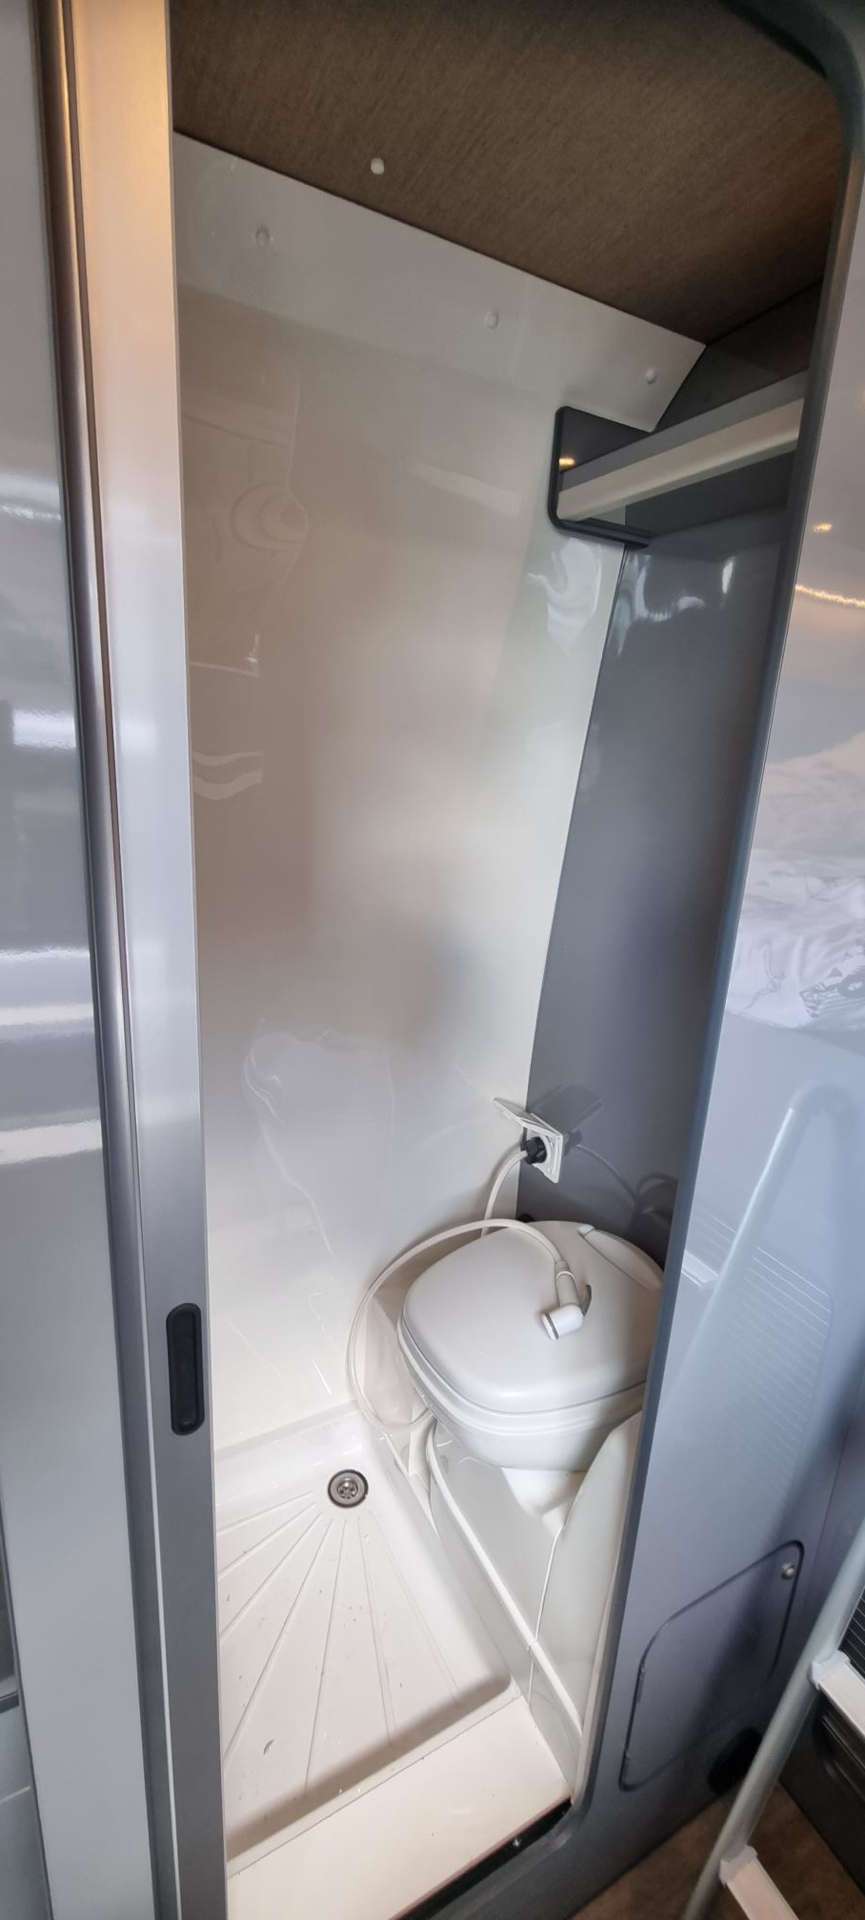 VW mwb crafter shower room 